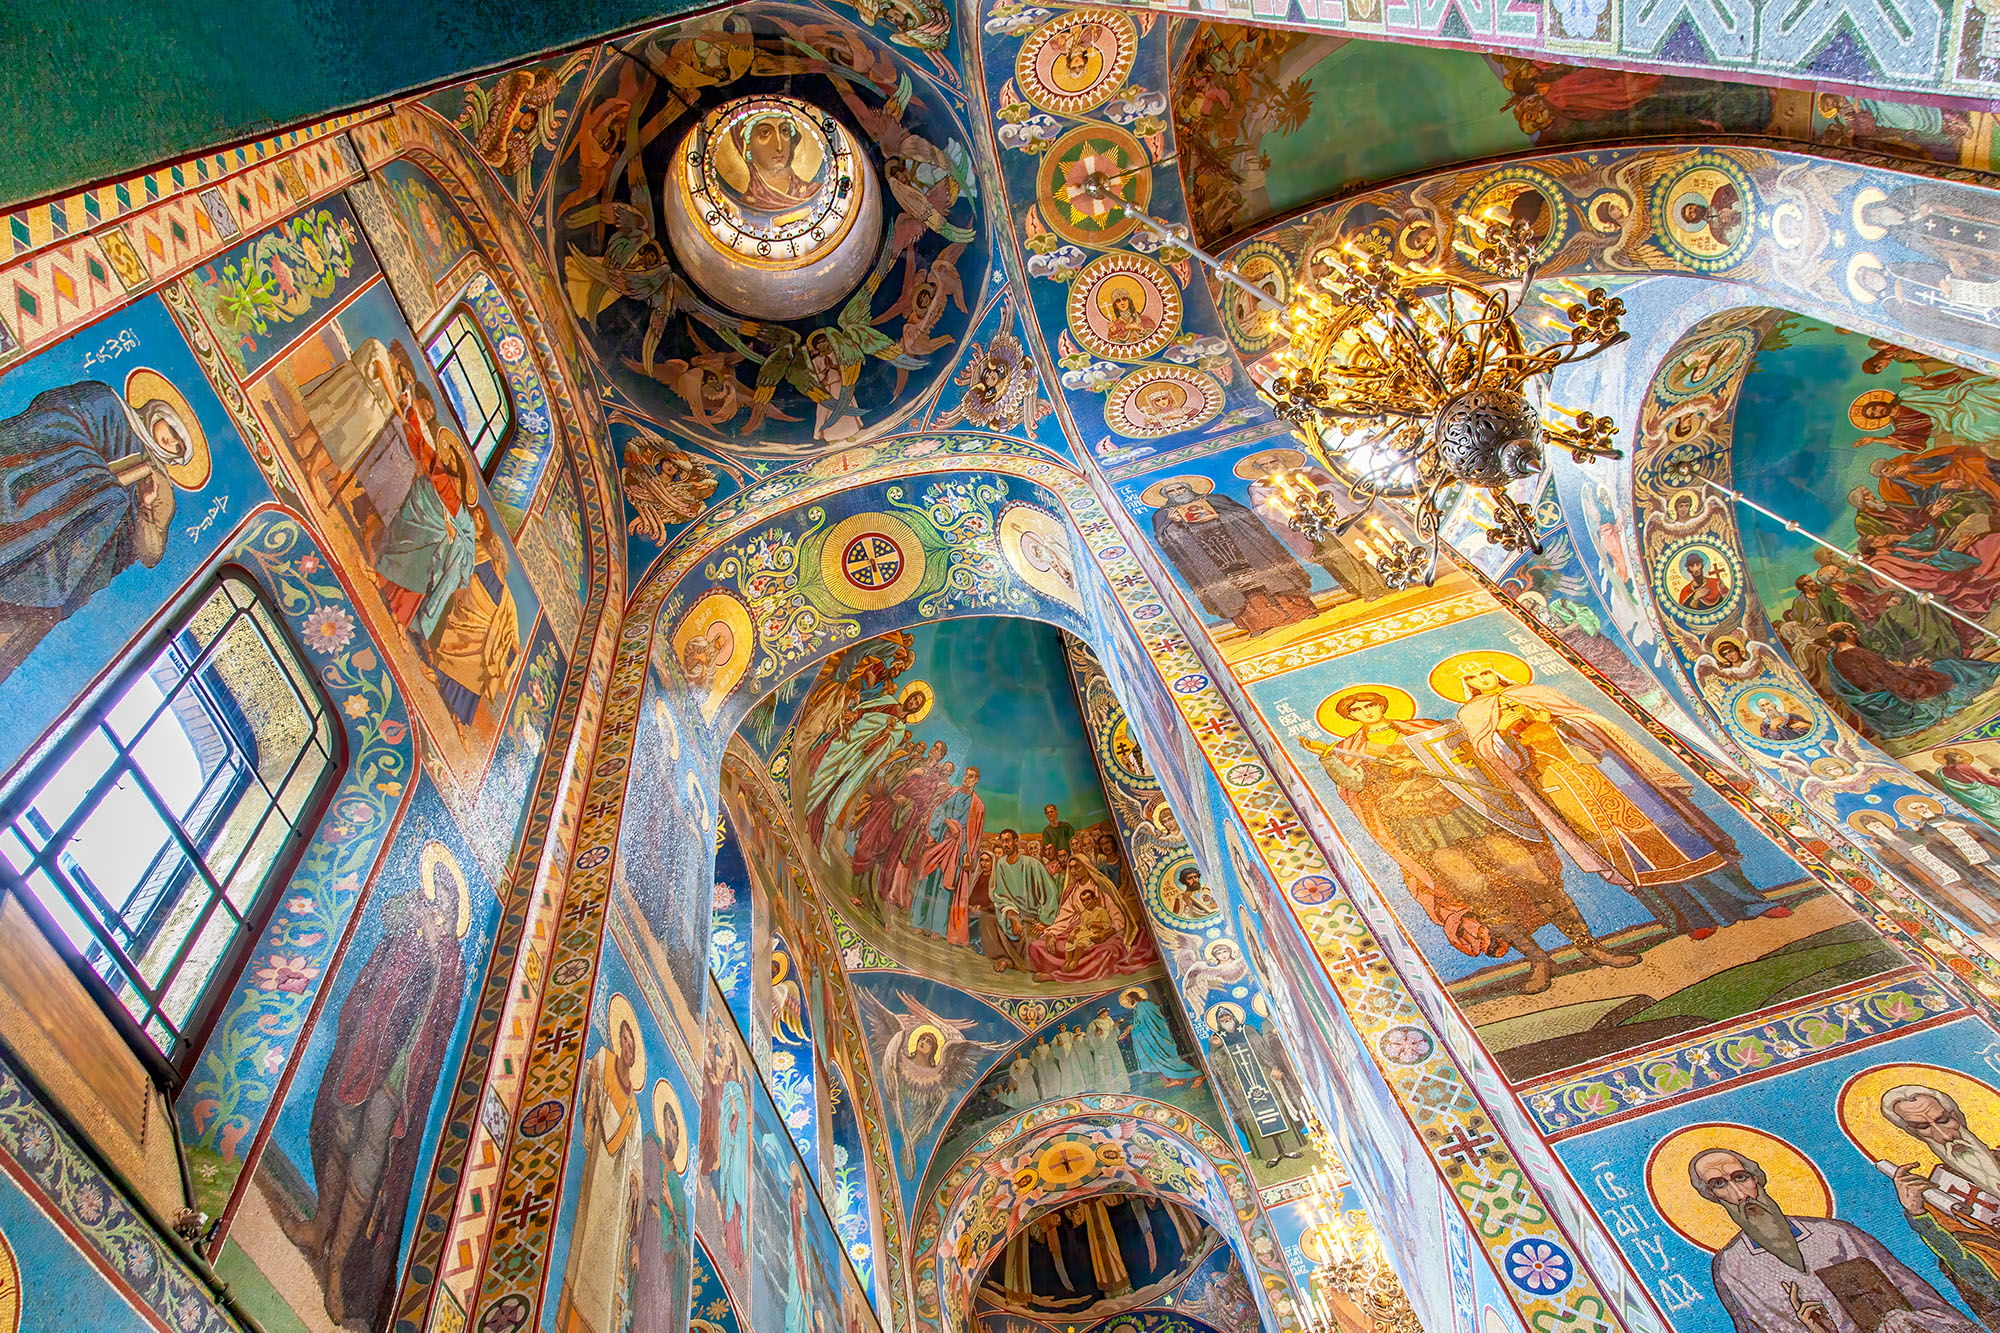 Inside the Church of the Savior on Spilled Blood in St. Petersburg, Russia, my gaze is drawn upward to a breathtaking sight....